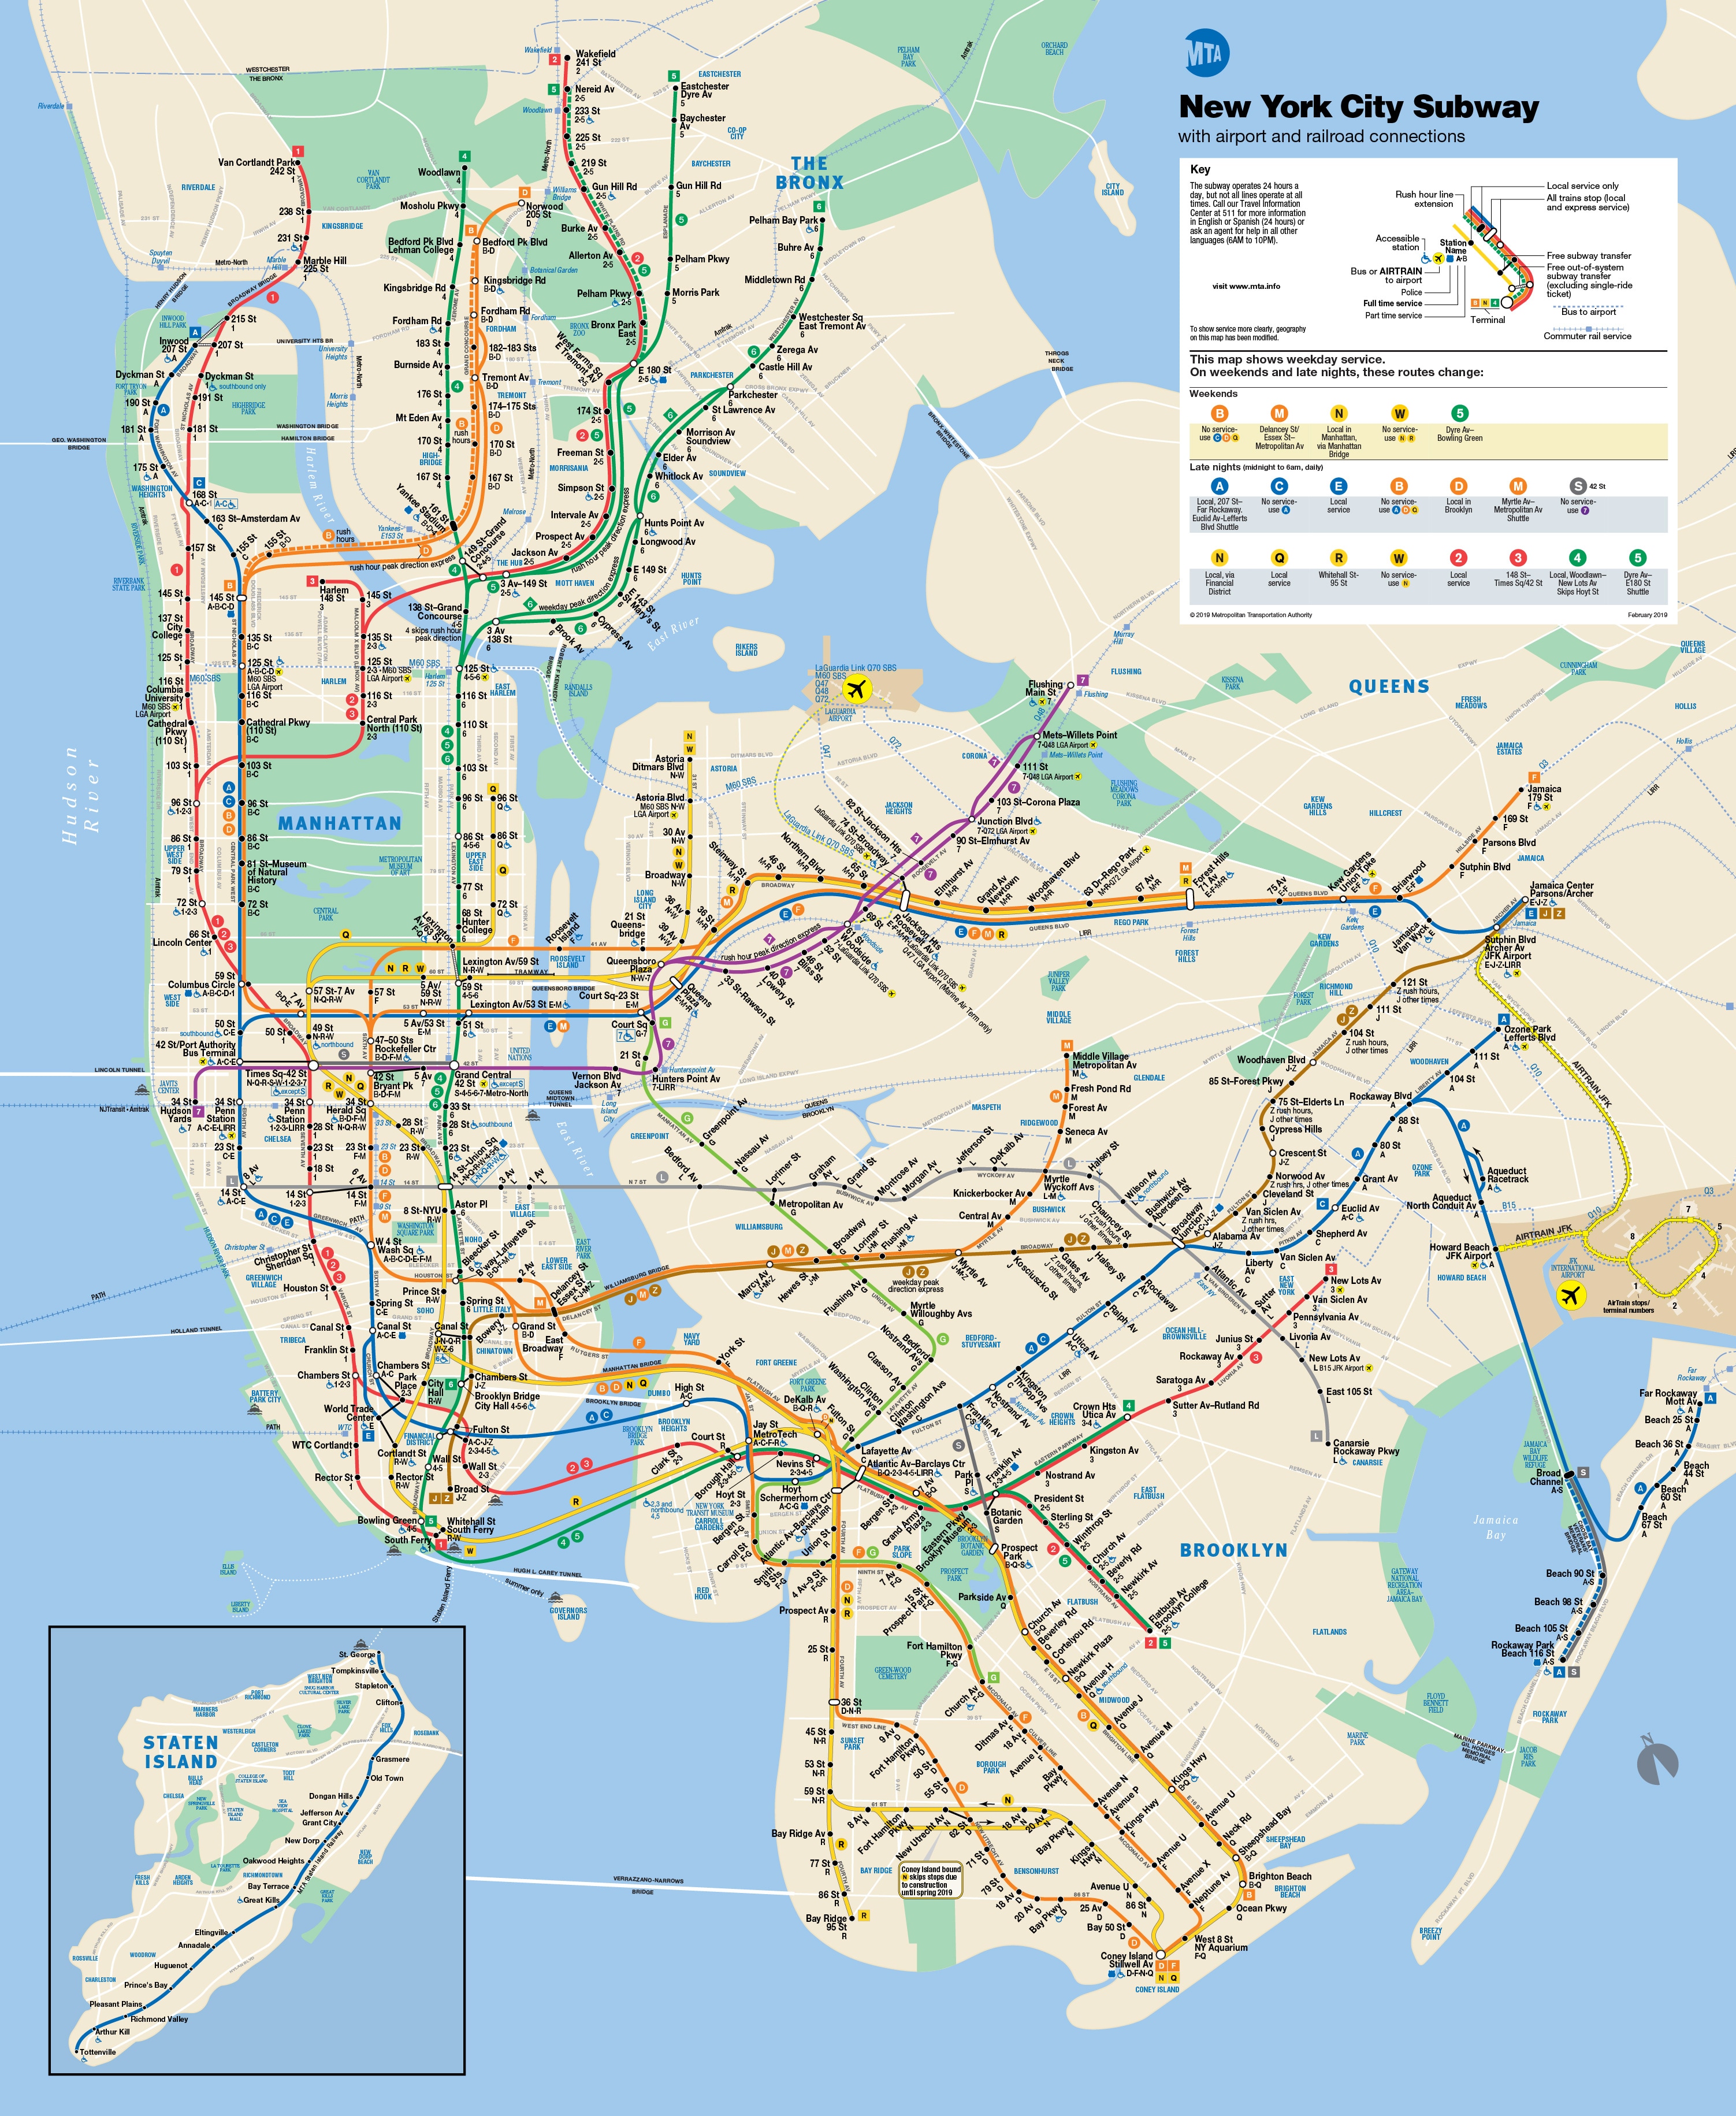 New Subway Map Features Nine Newly Accessible Stations and Historic Renaming